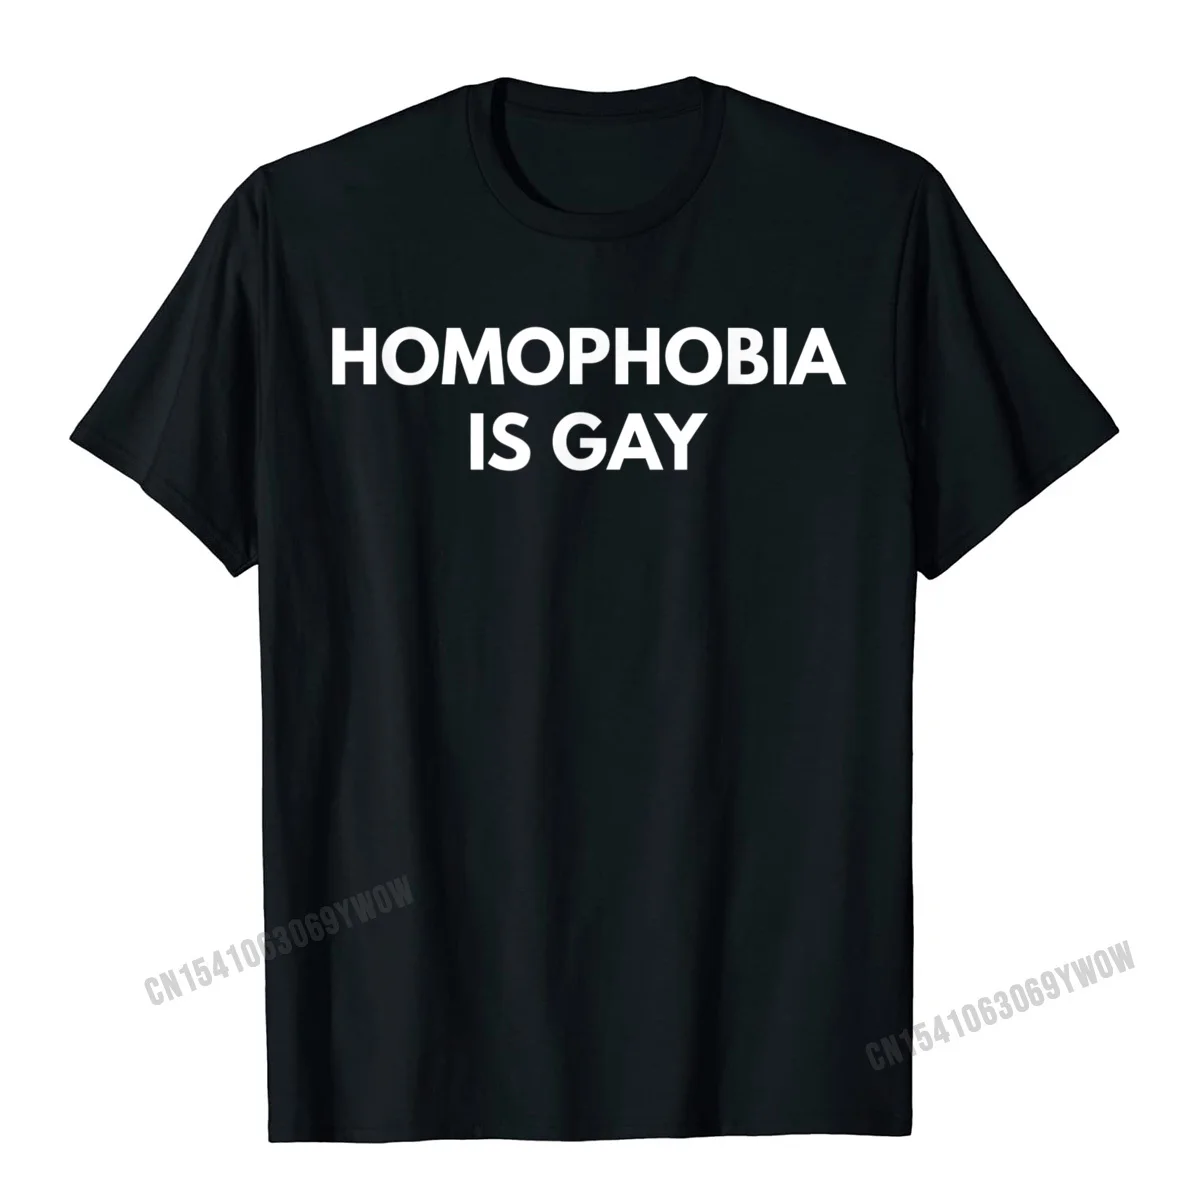 

Homophobia Is Gay T-Shirt - Funny LGBT Pride Shirts Camisas Men Fitness Tight Tshirts For Men Cotton Tees Casual Brand